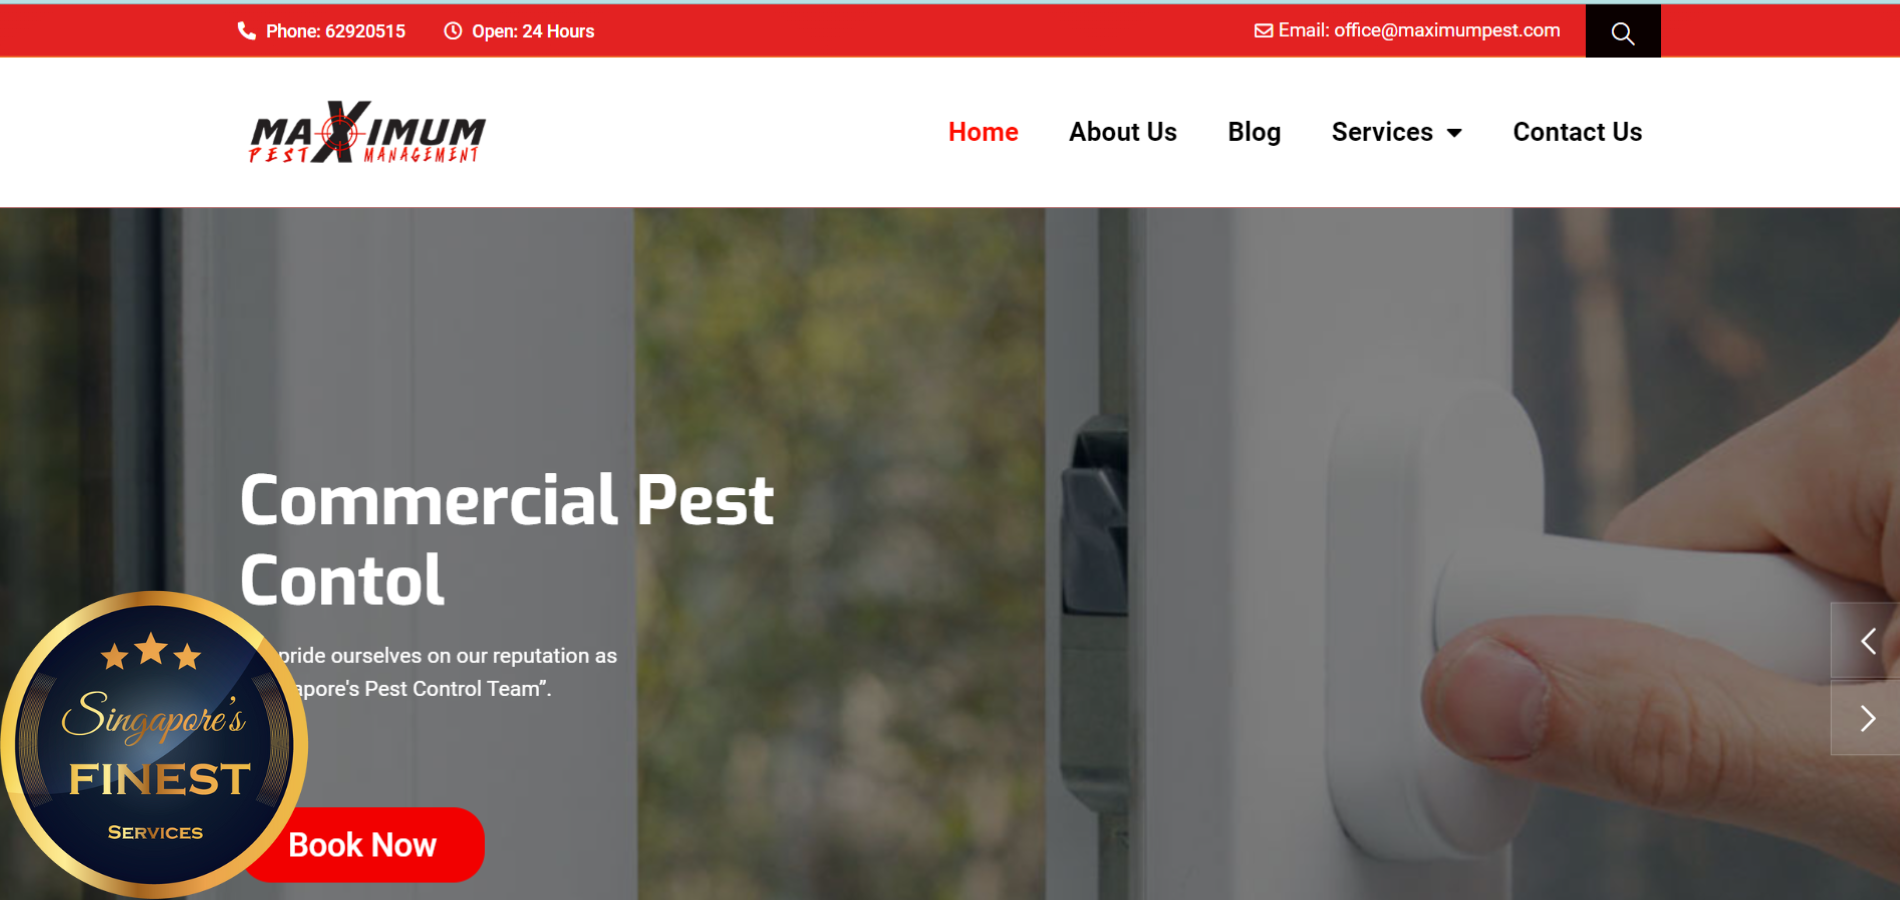 The Finest Pest Control Service in Singapore